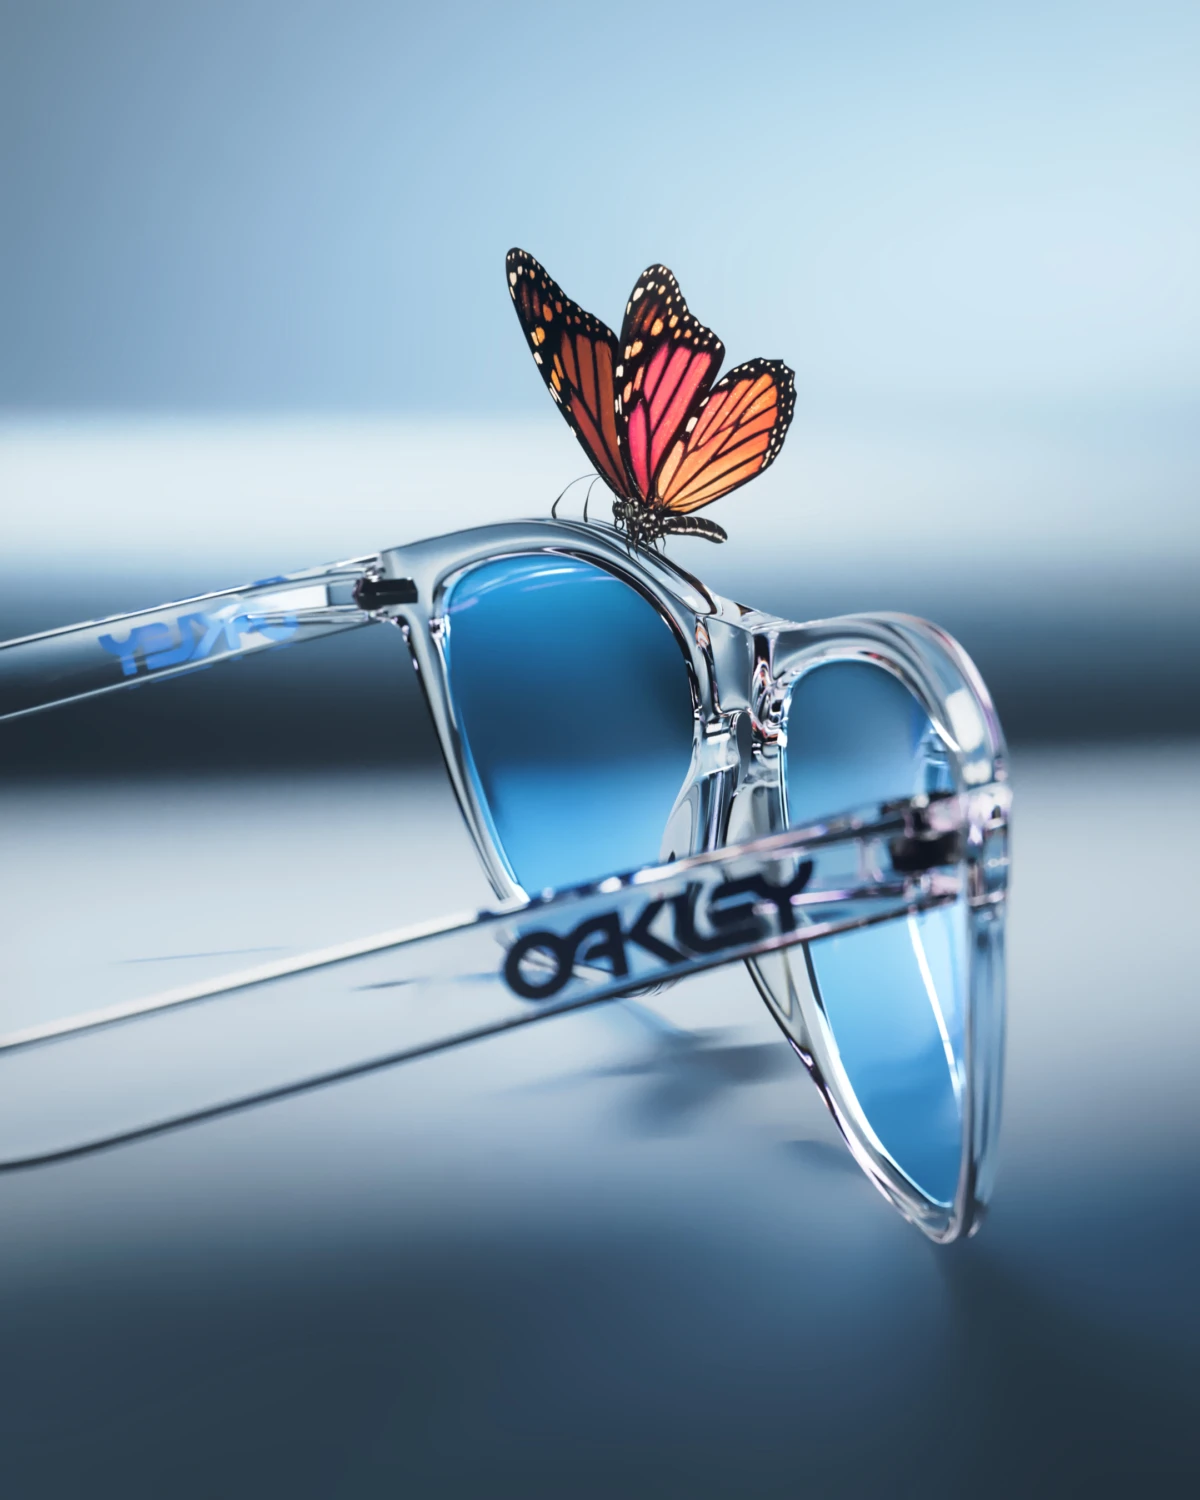 Fashion & Technology Converge in New Frogskins Film